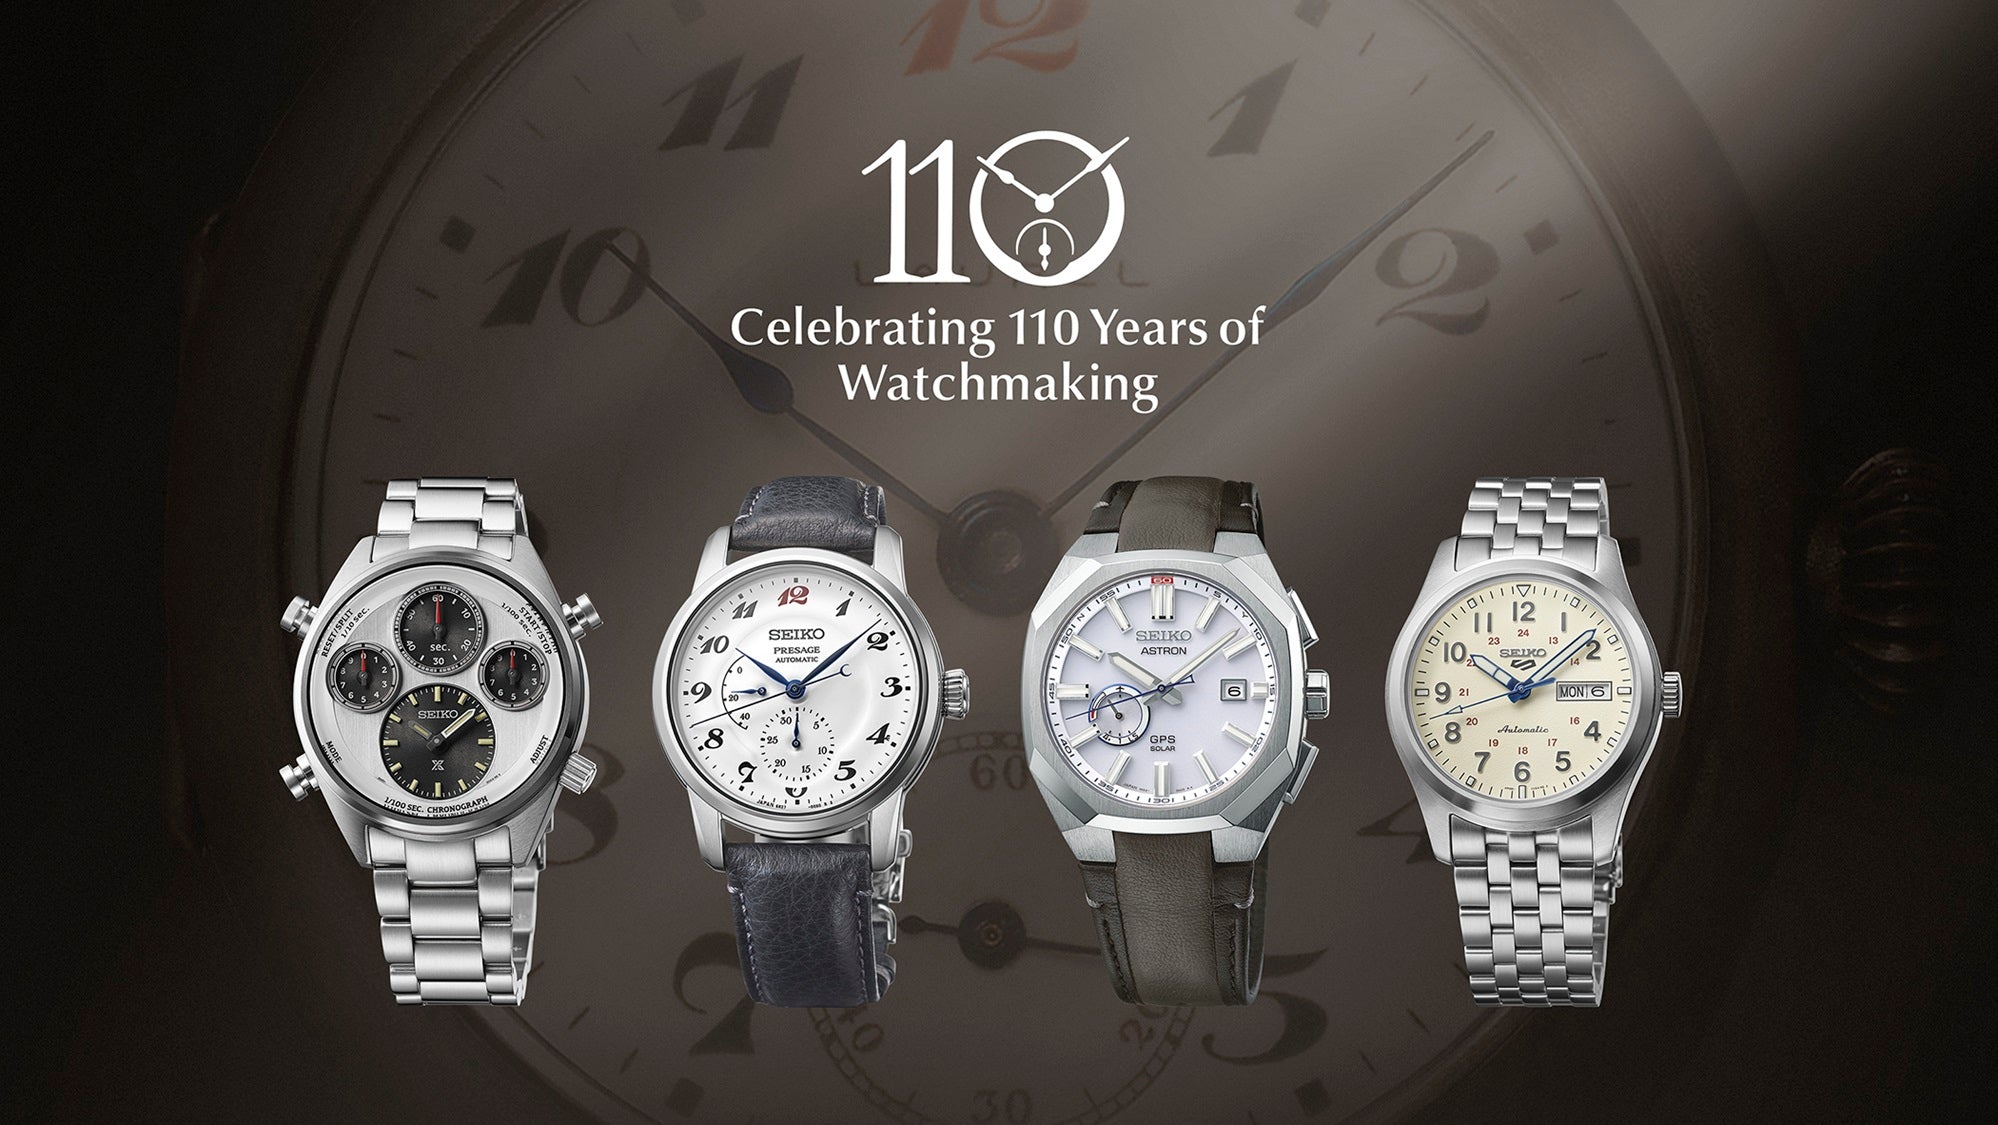 Presage, Prospex, Astron, and 5 Sports celebrate the 110th anniversary of Seiko’s first wristwatch.